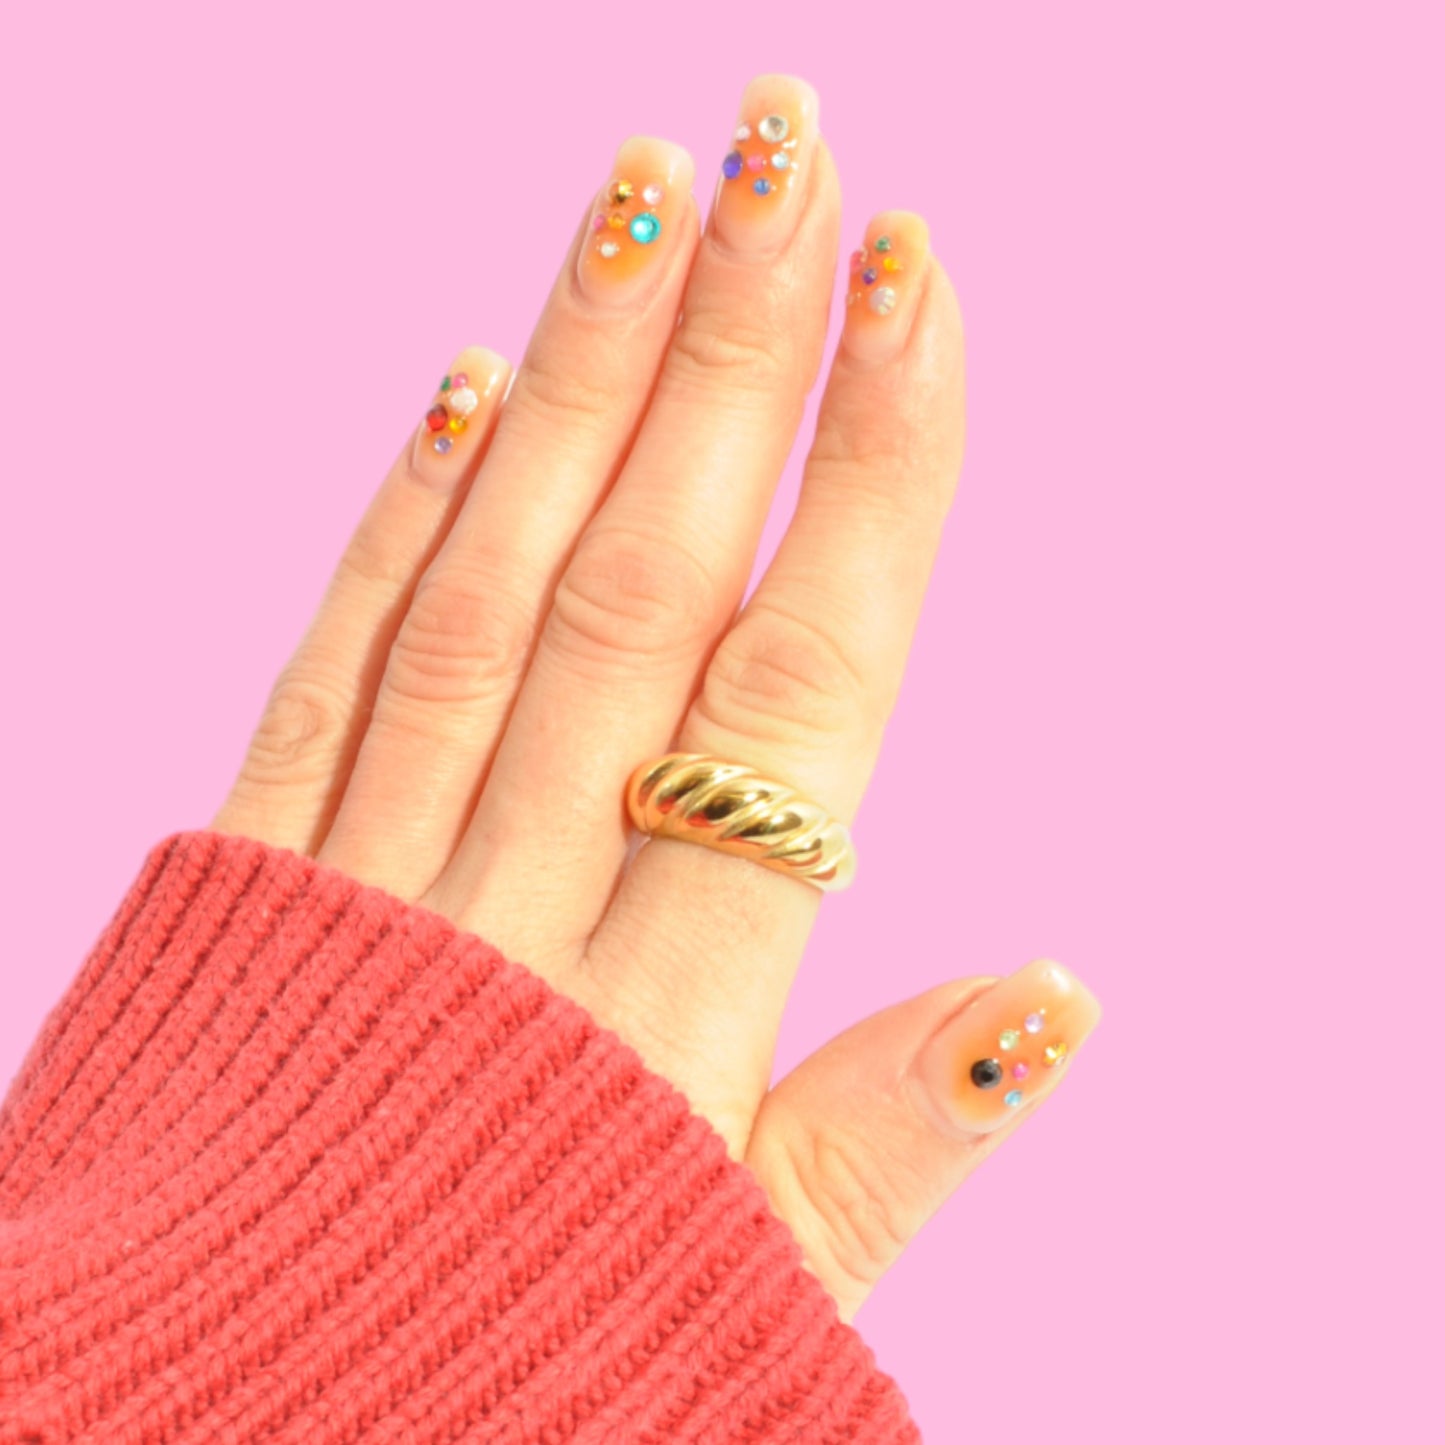 Chunky Croissant Gold Ring